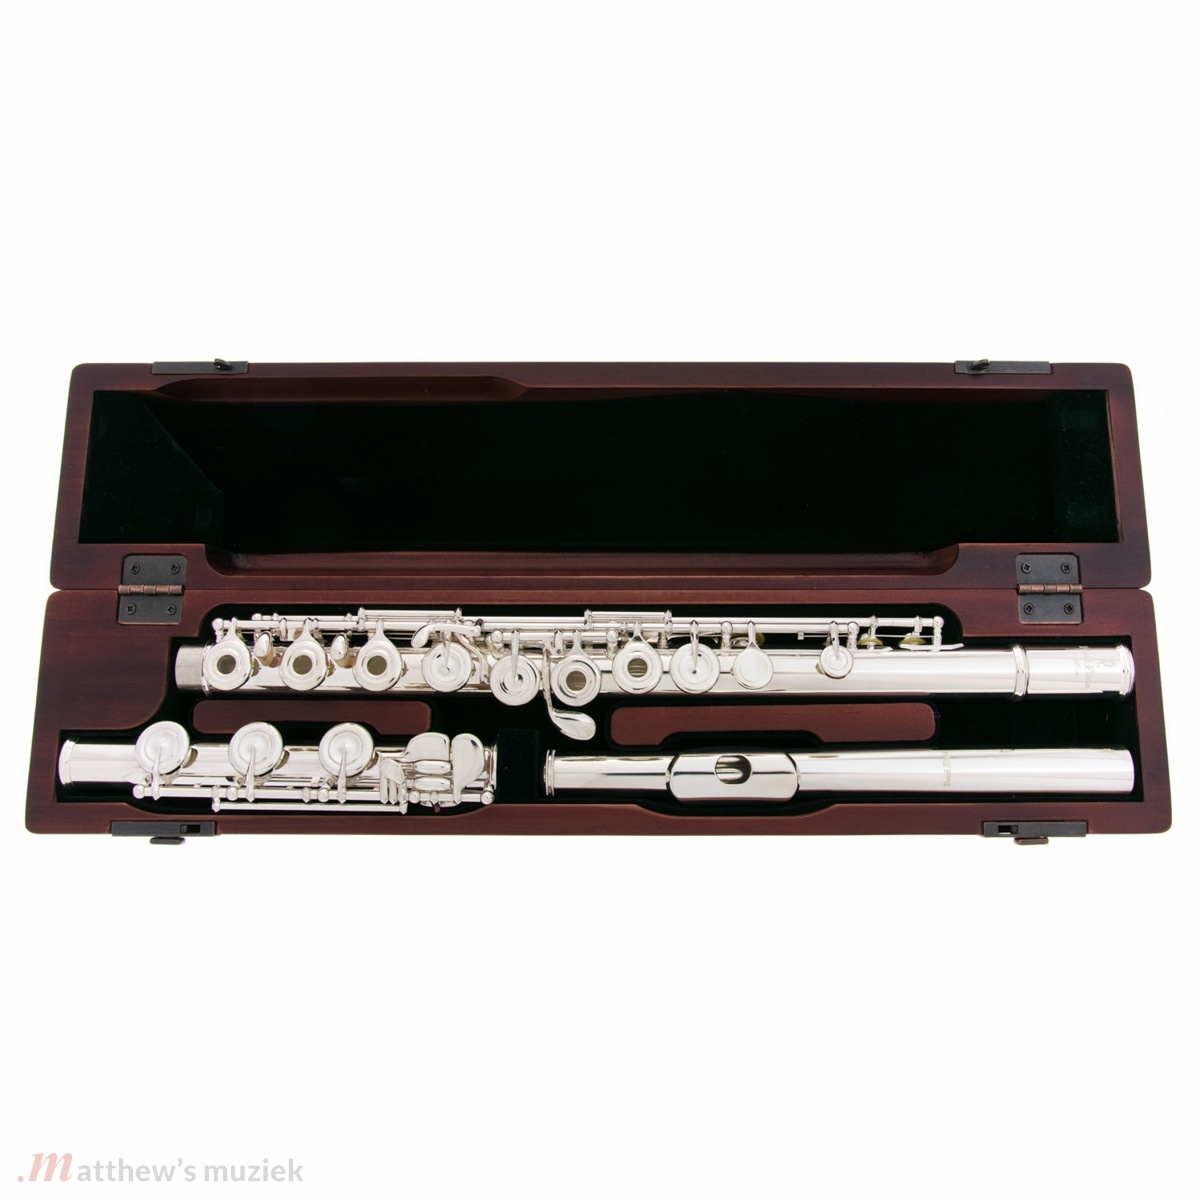 Pearl Flute - Dolce 695 RBE